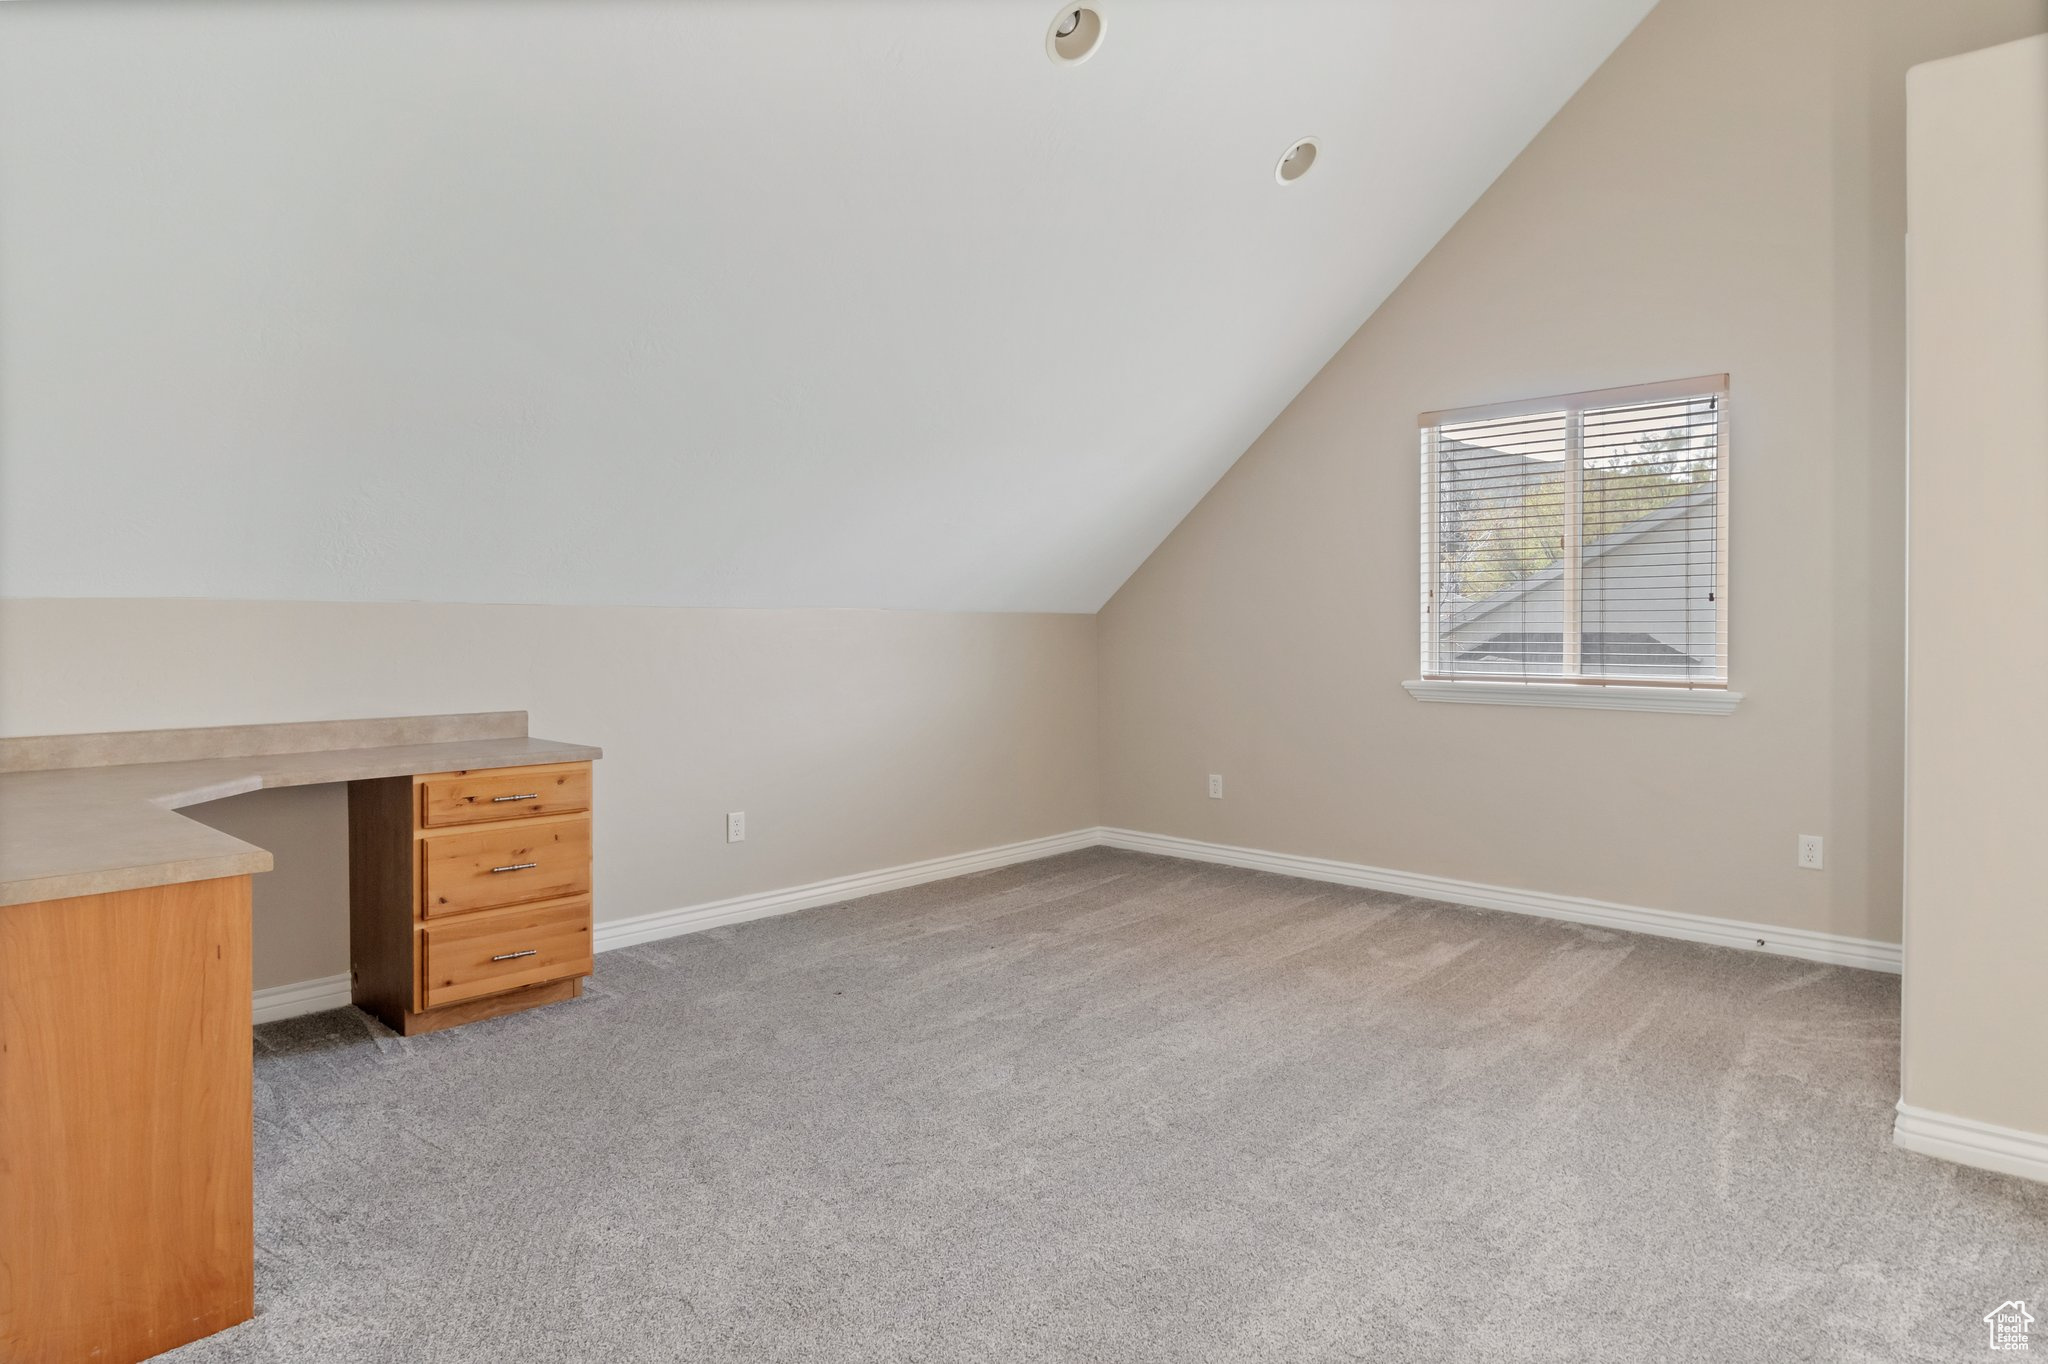 Additional living space featuring light colored carpet and lofted ceiling